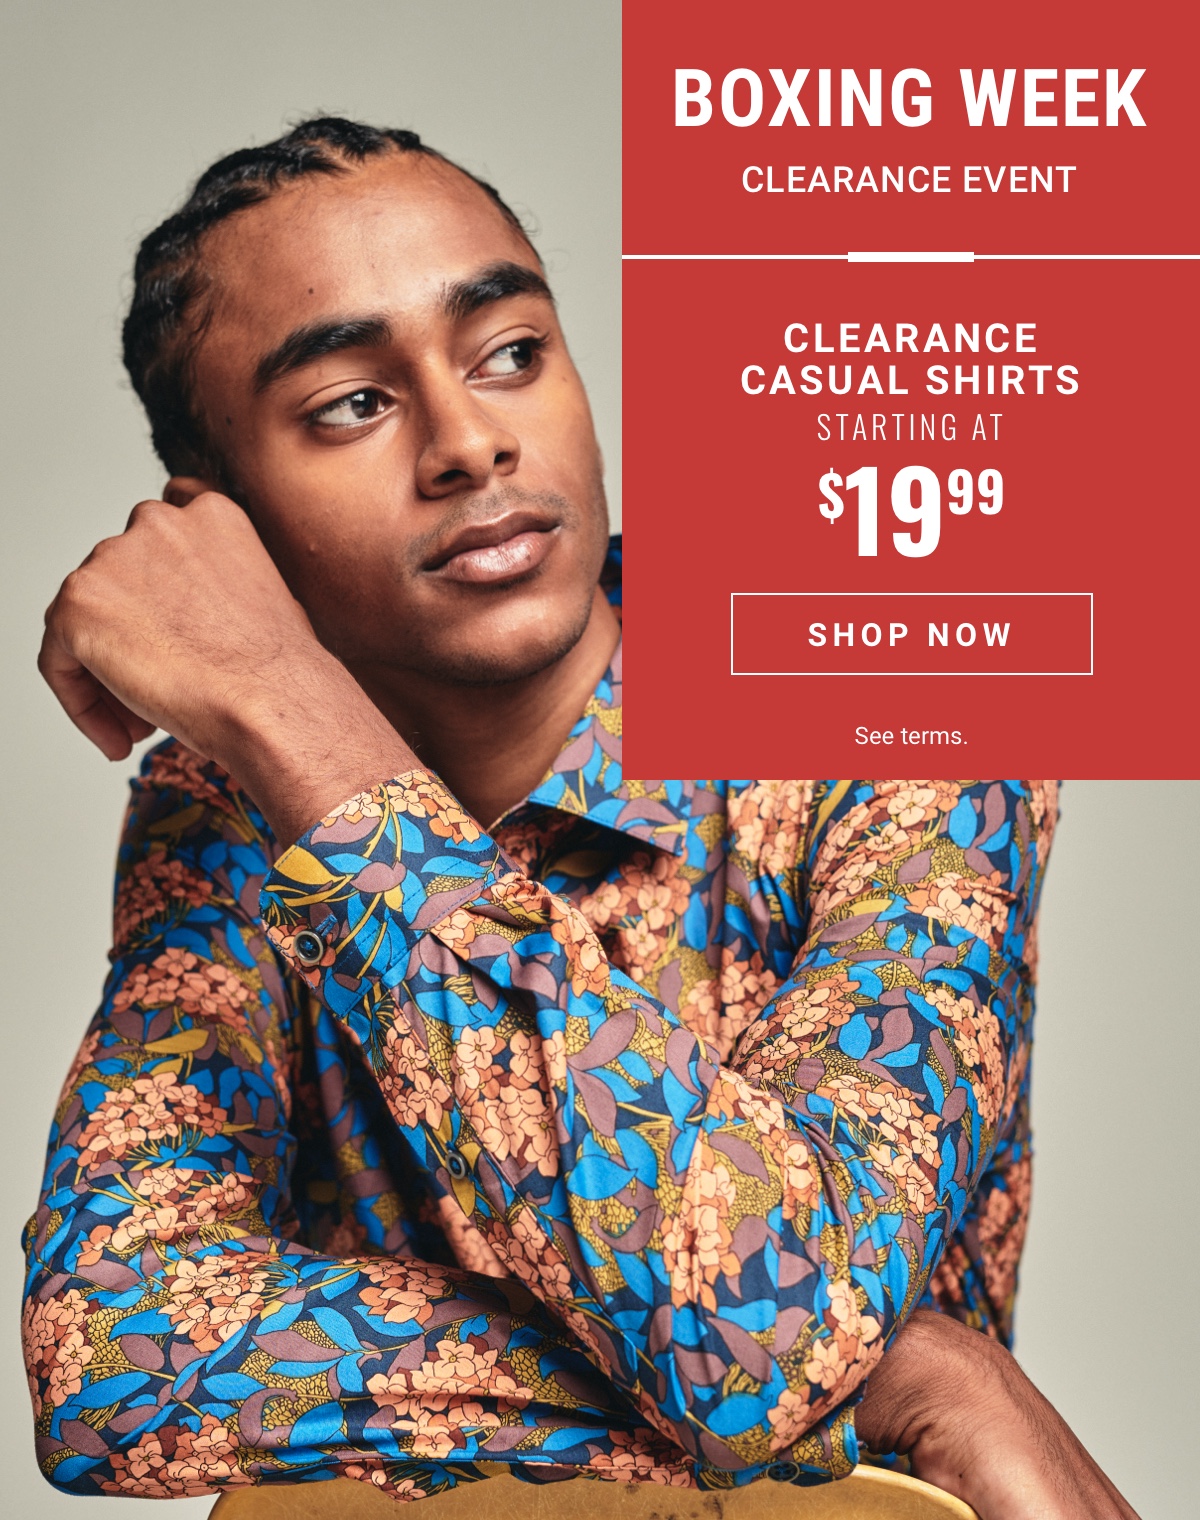 Shop clearance casual shirts starting at 19 99 during our Boxing Week Clearance Event